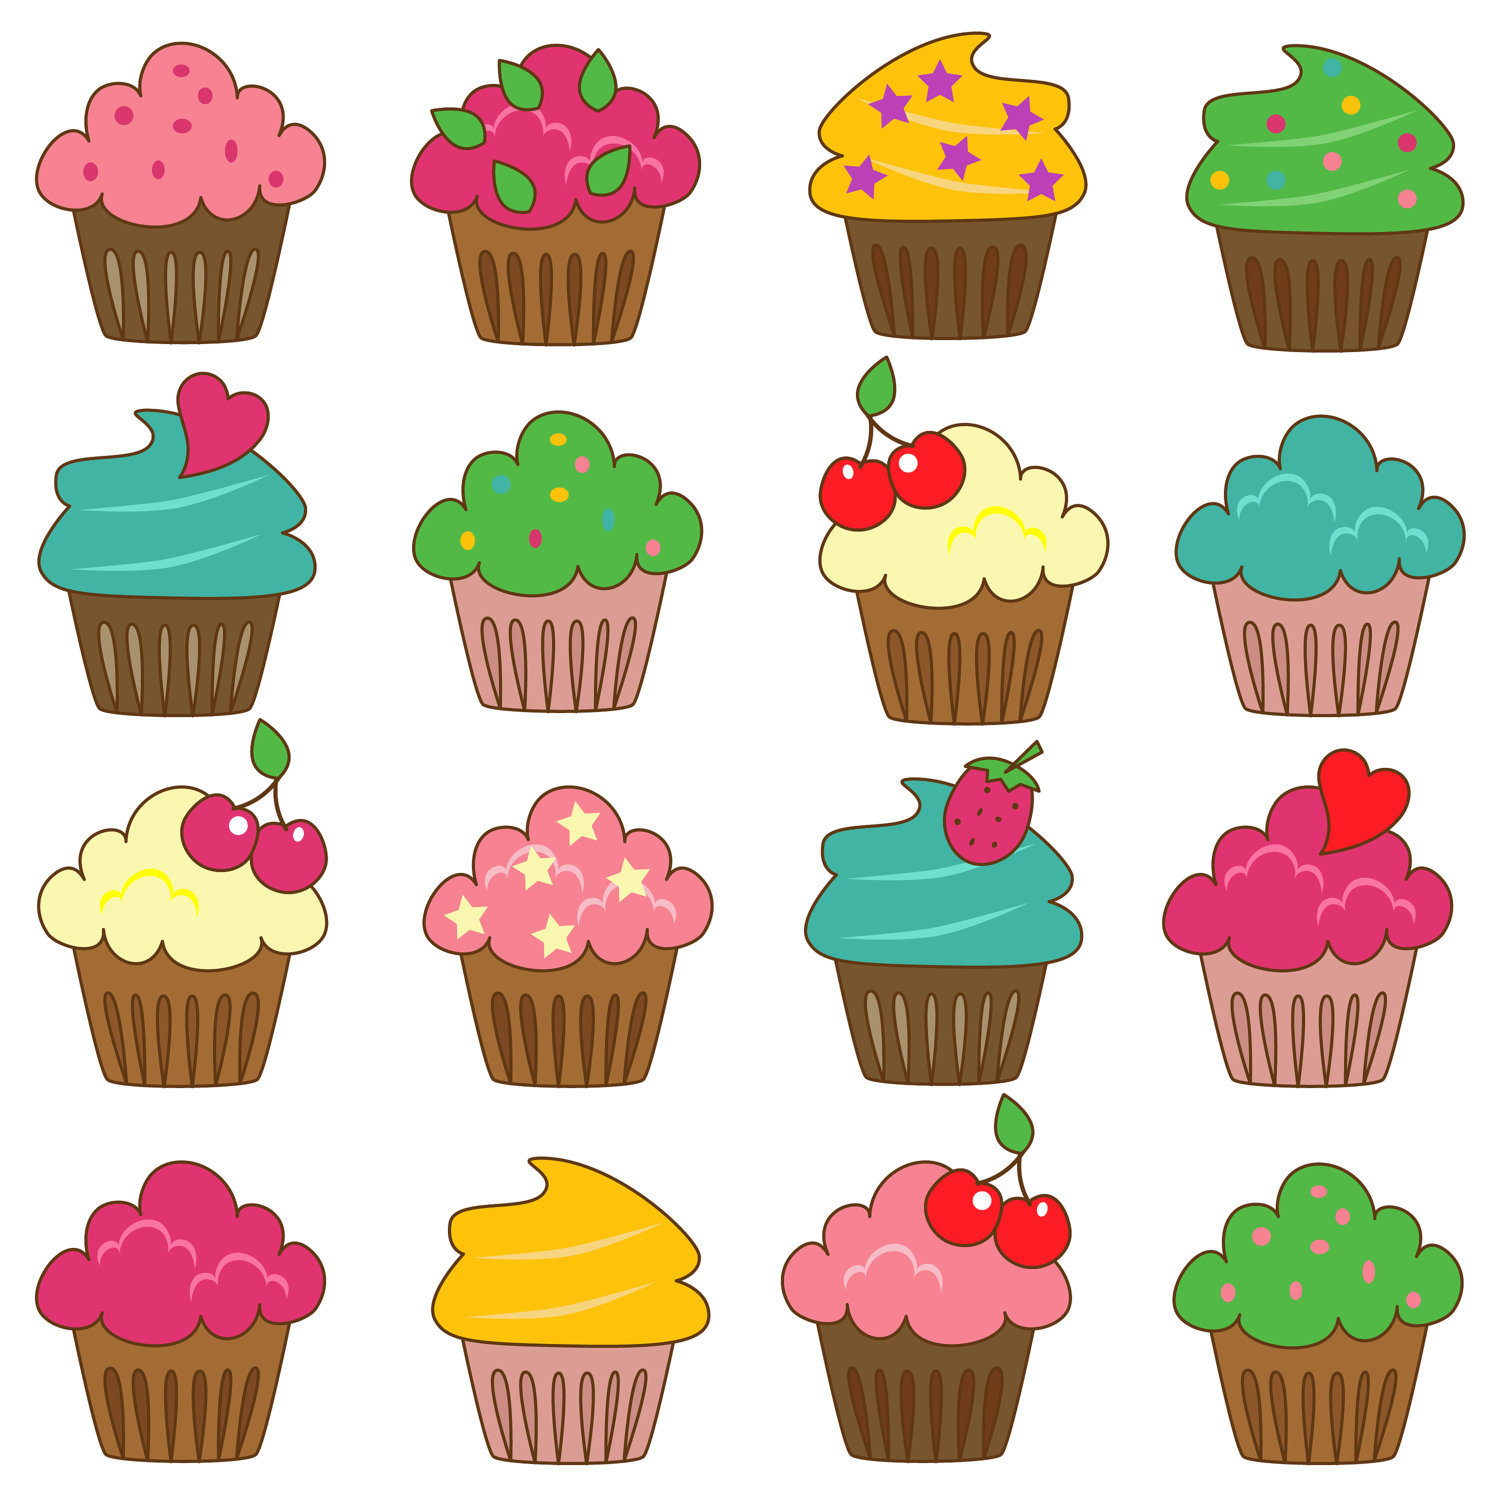 Cupcake Images Clipart Free - ClipArt Best